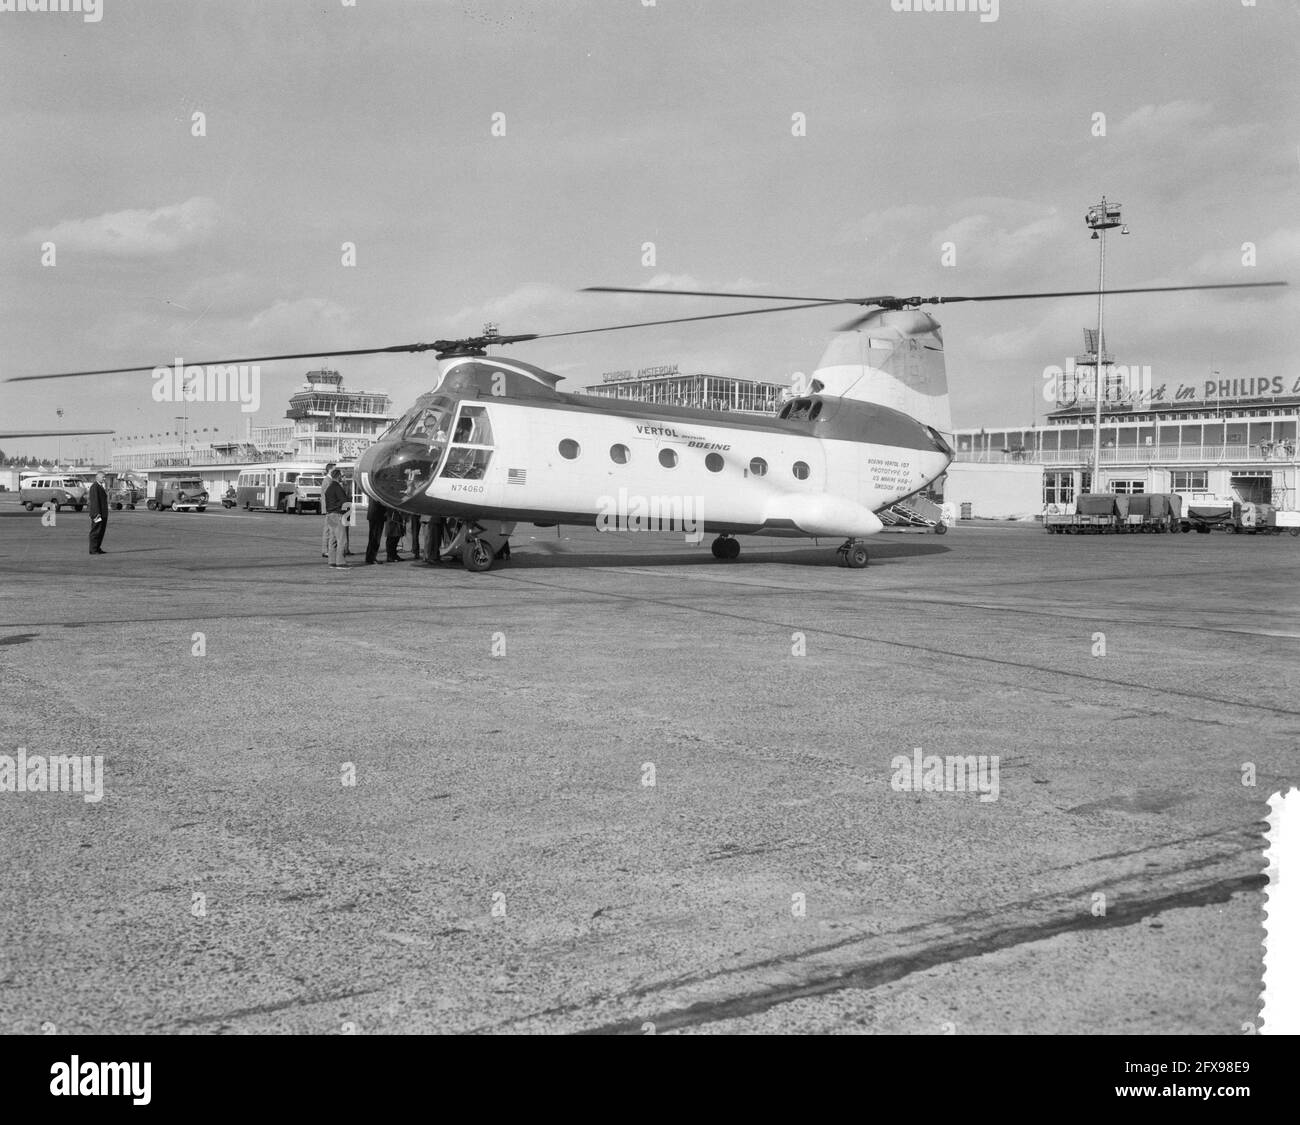 Boeing Vertol 107 demonstration. At Schiphol Airport, 6 July 1961, Demonstrations, The Netherlands, 20th century press agency photo, news to remember, documentary, historic photography 1945-1990, visual stories, human history of the Twentieth Century, capturing moments in time Stock Photo